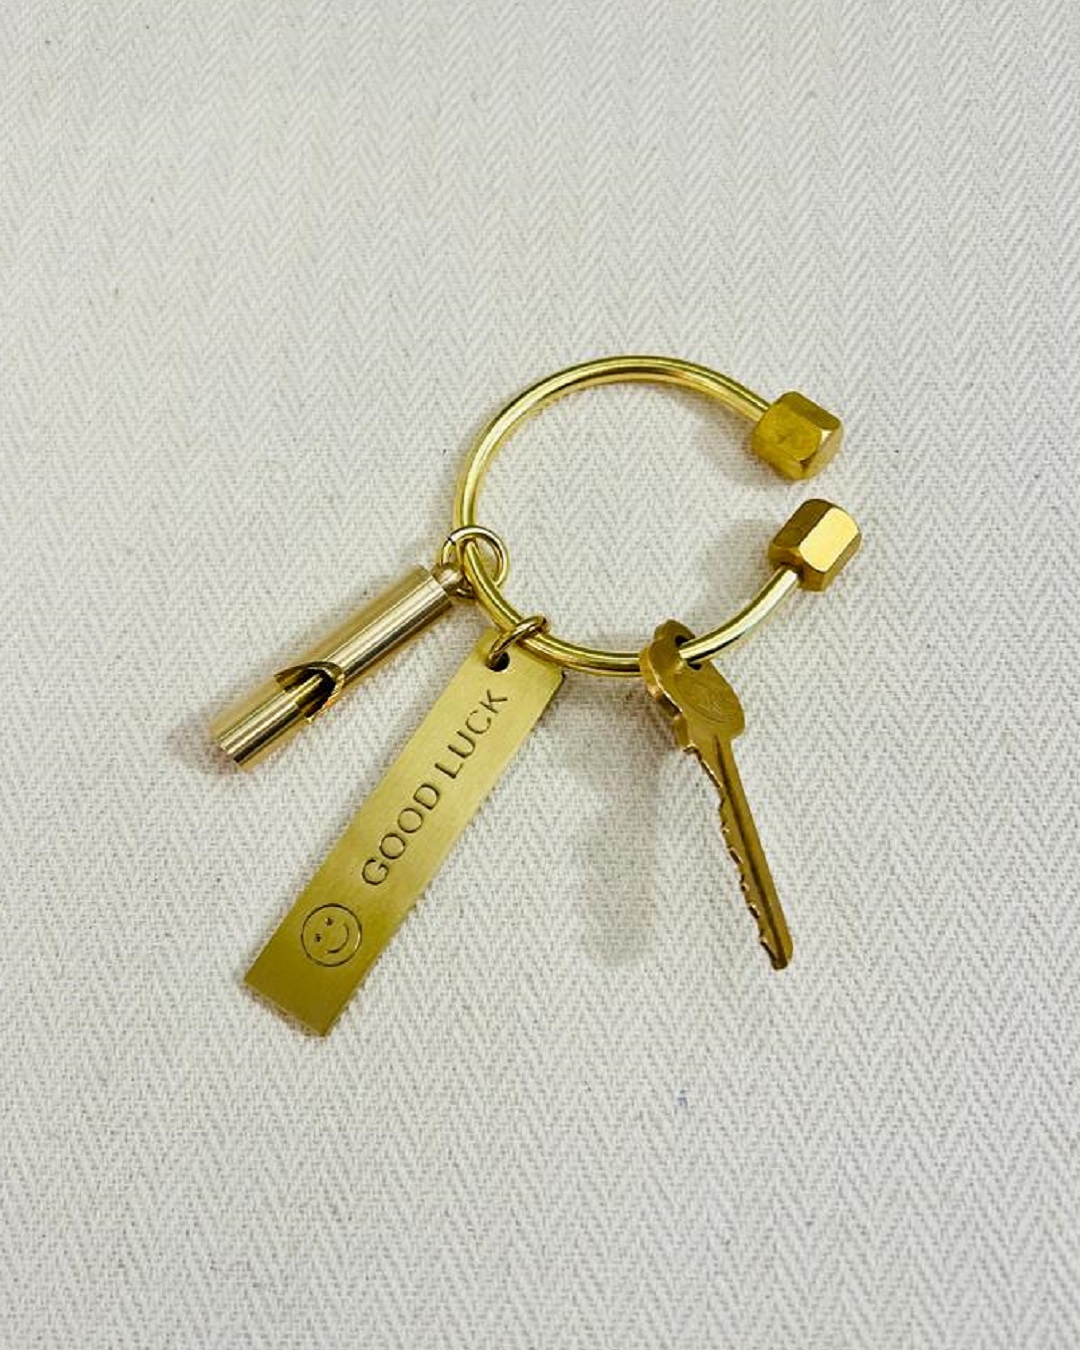 Brass keyring with key and other keyrings on it